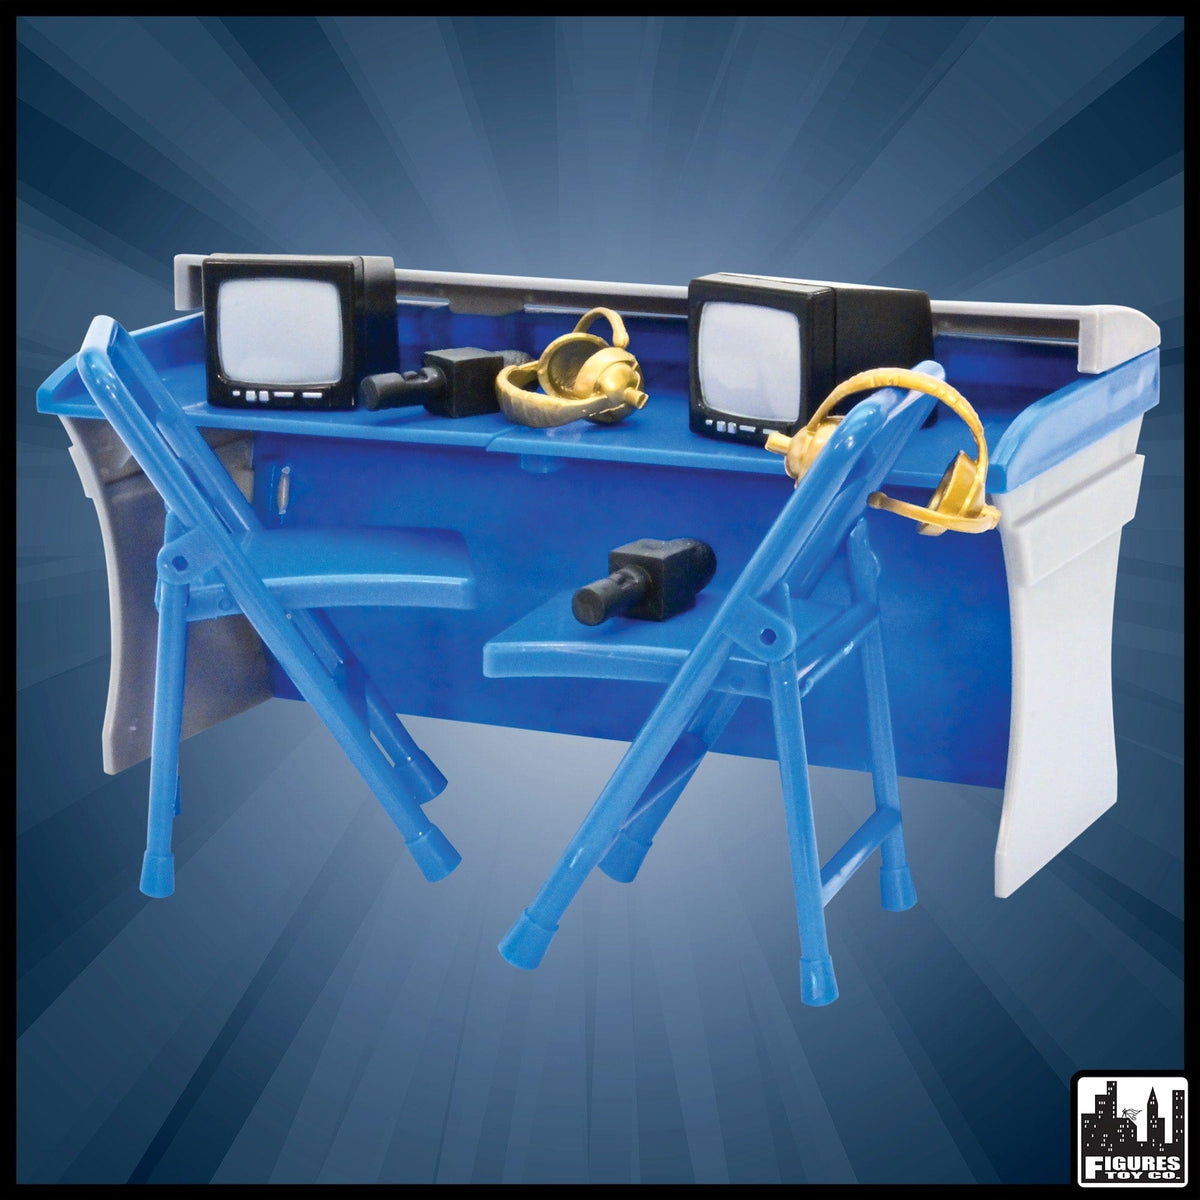 Blue &amp; Gray Commentator Table Playset for WWE Wrestling Action Figures